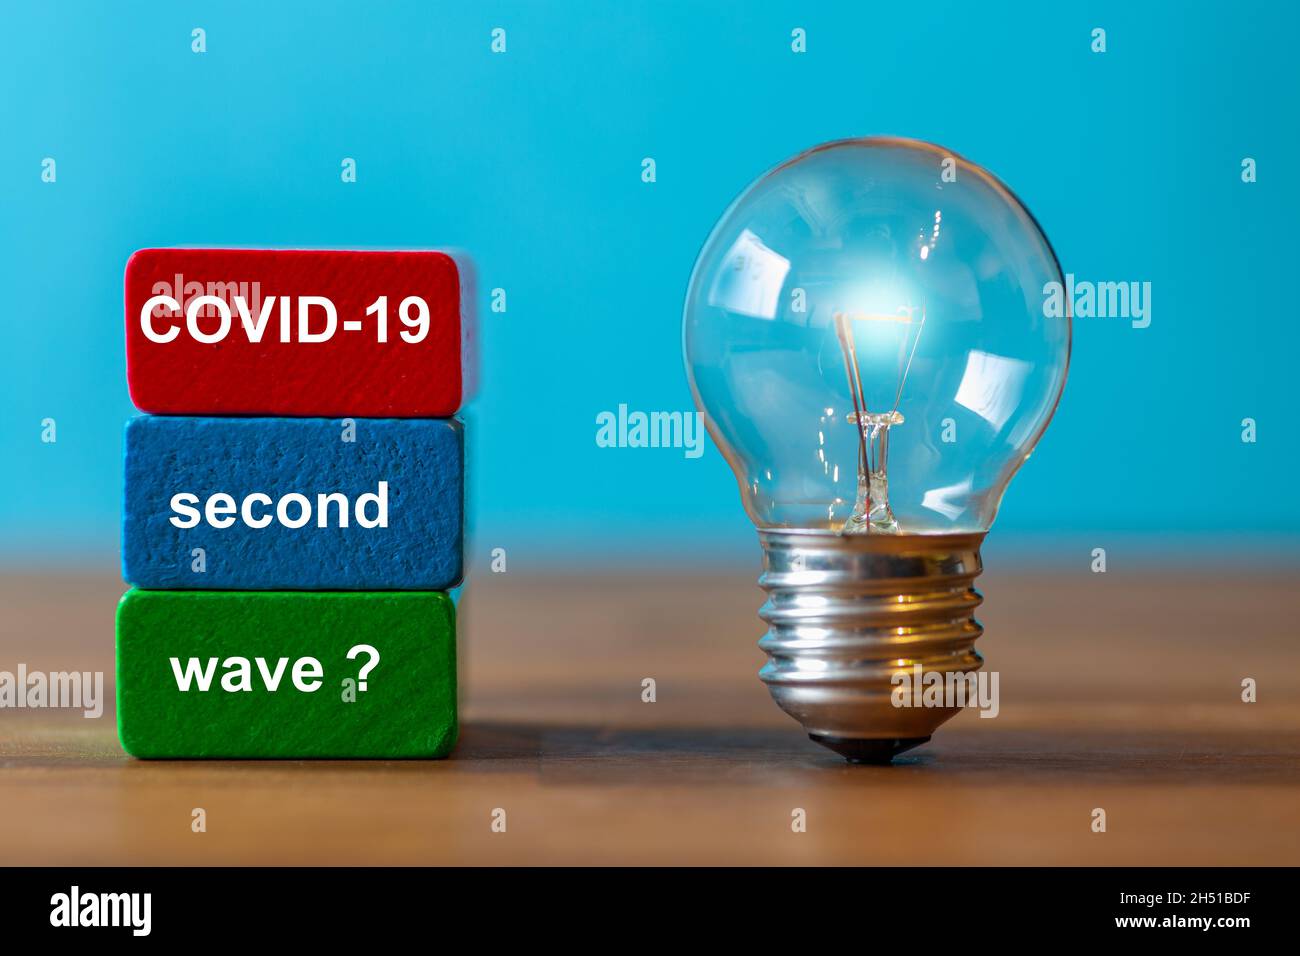 COVID-19 second wave? are the words written on a colored toy block. Next to the toy blocks, an ancient light bulb with glowing light stands freely and Stock Photo